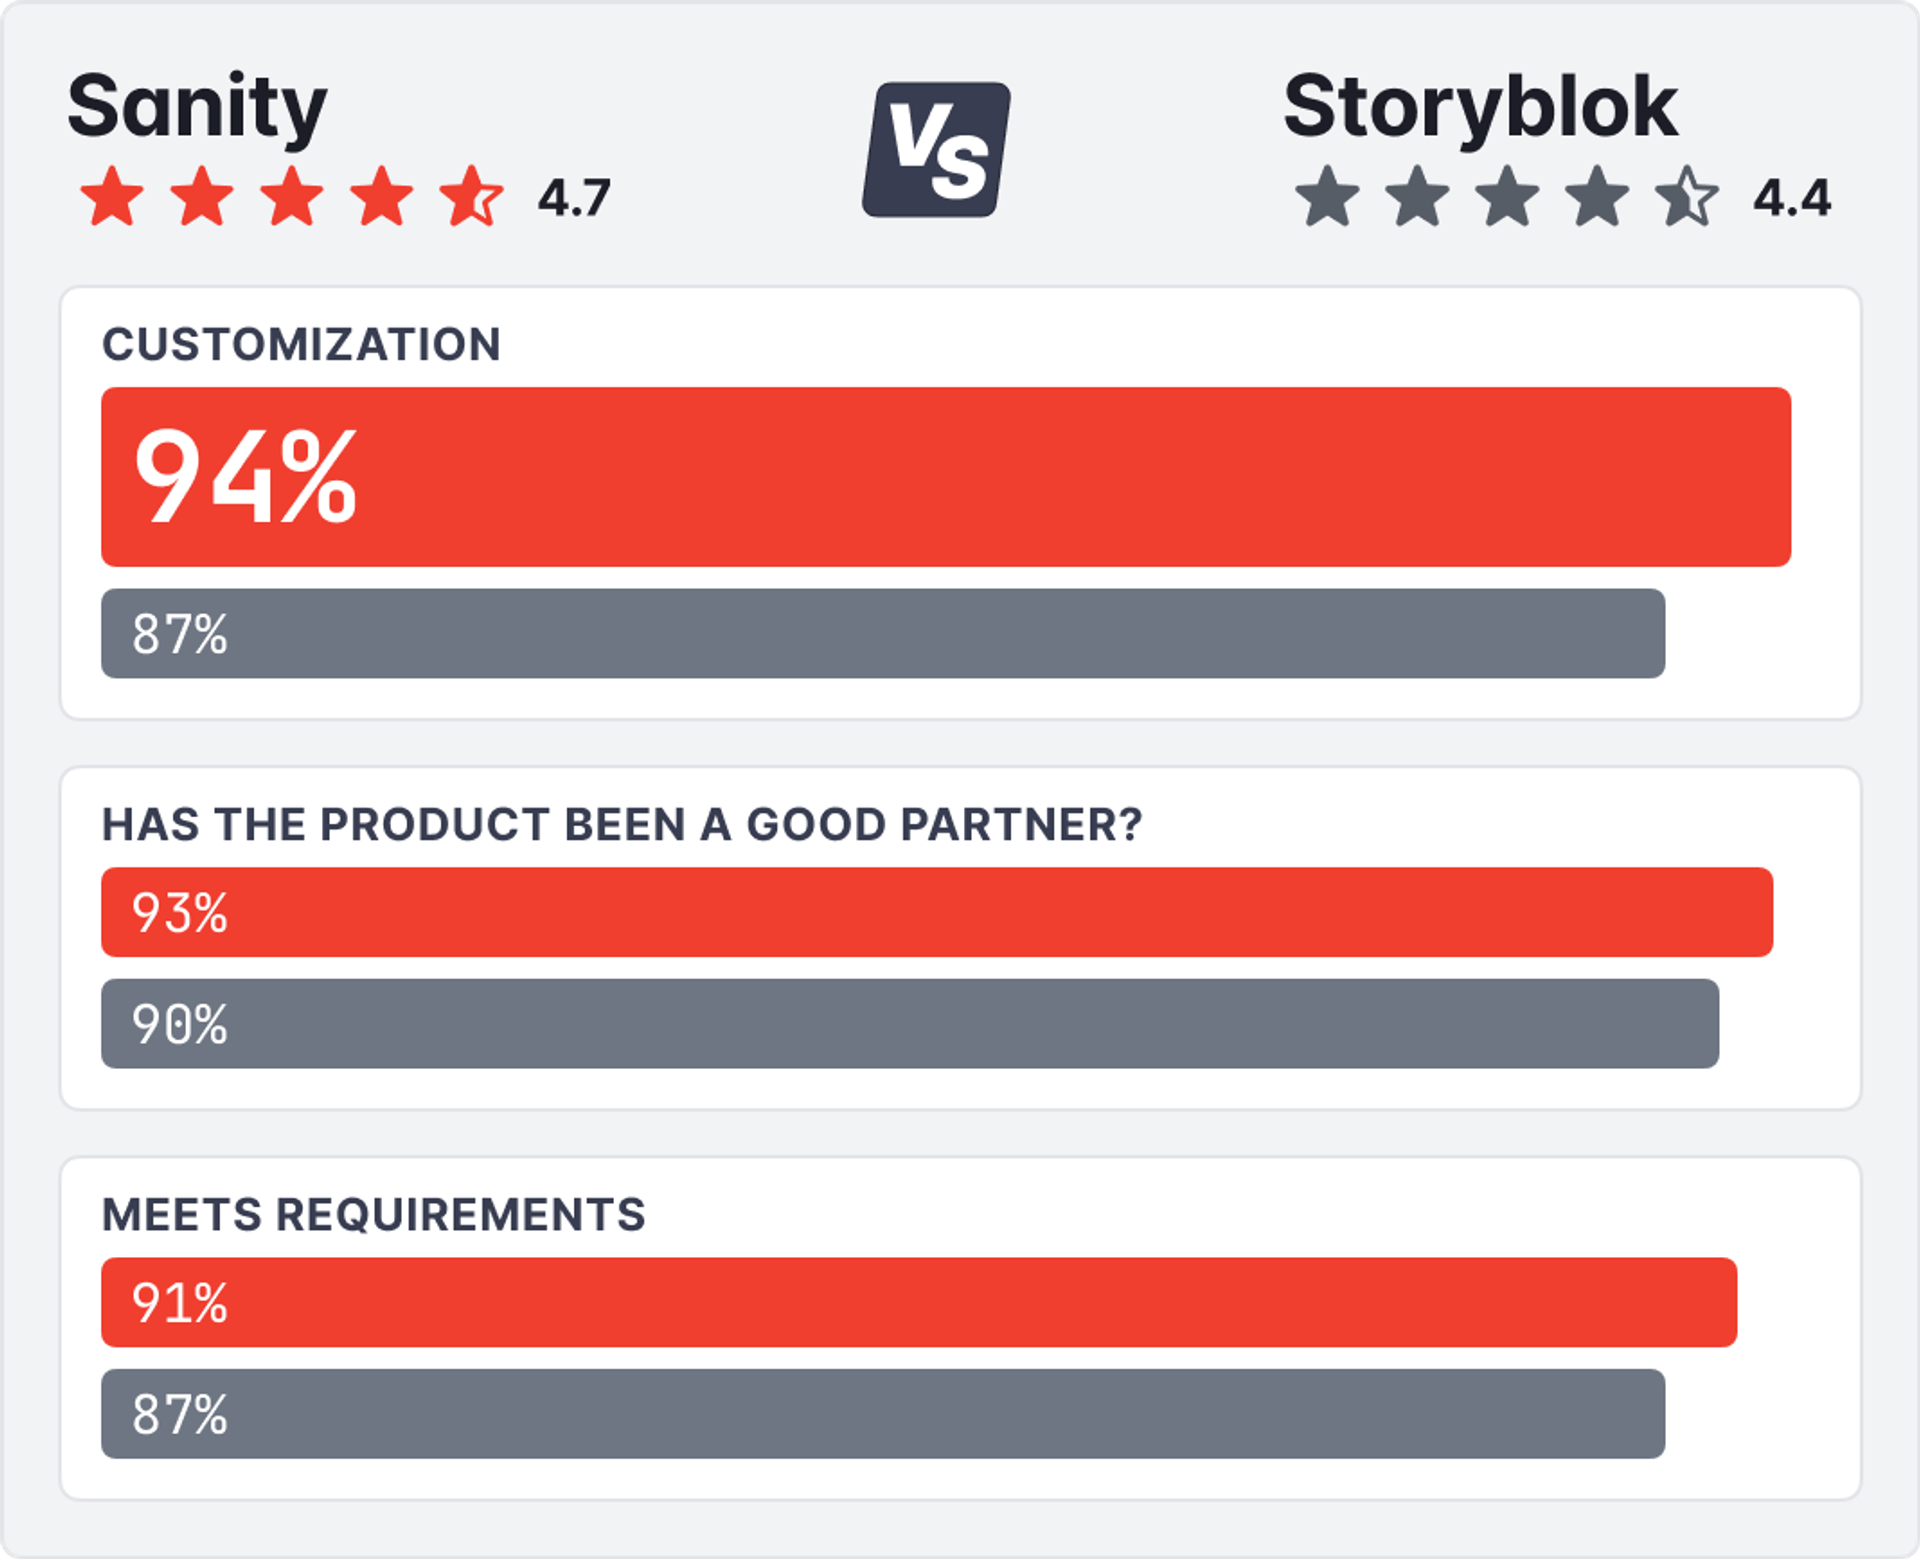 a comparison of sanity and storyblok shows that sanity is rated higher for customization